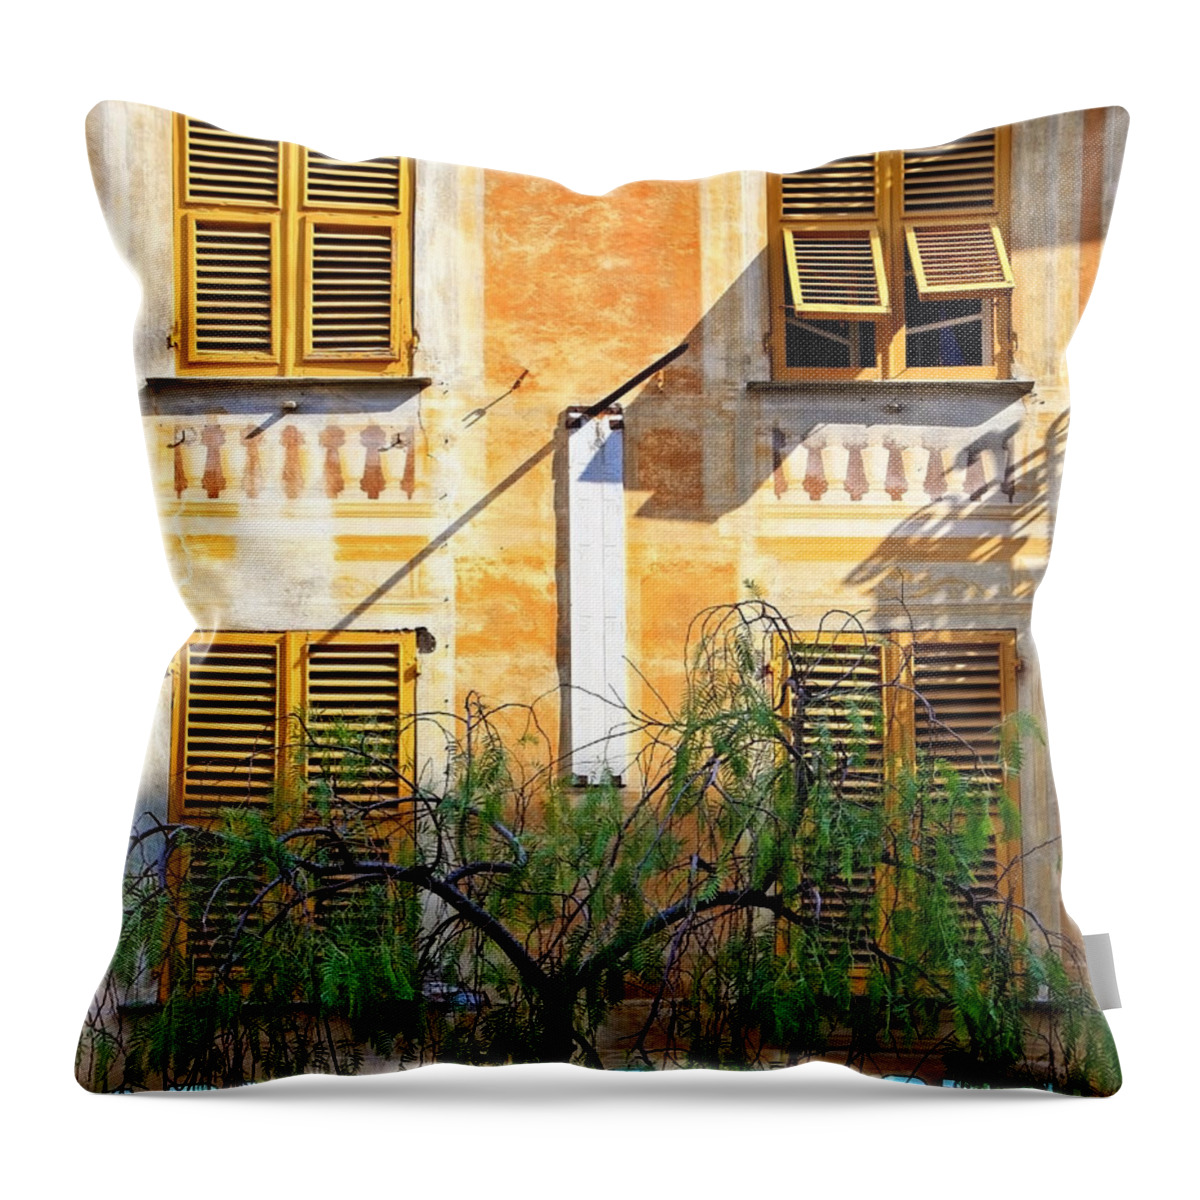 Colored Photo Throw Pillow featuring the photograph Chiavari Windows #1 by Kate McKenna